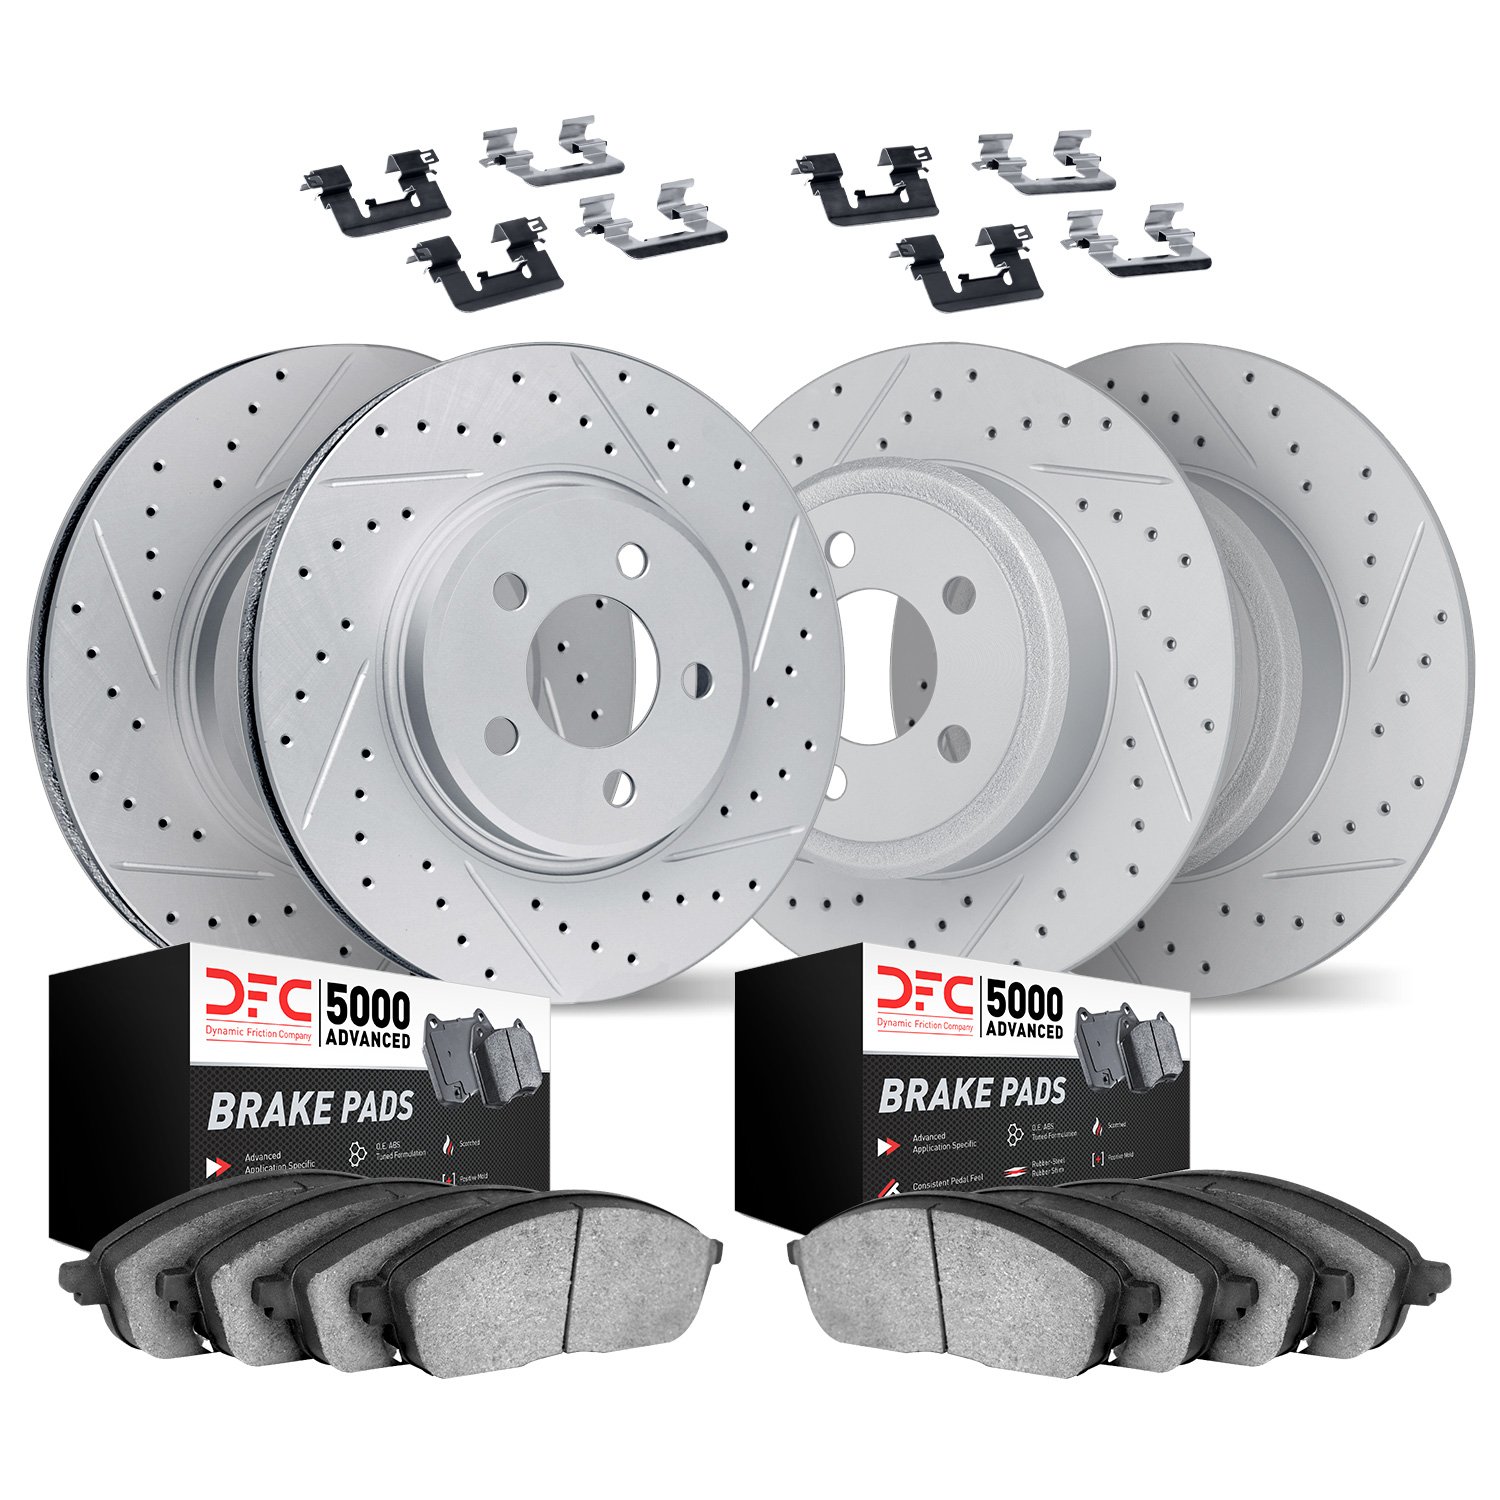 2514-13046 Geoperformance Drilled/Slotted Rotors w/5000 Advanced Brake Pads Kit & Hardware, 2013-2018 Subaru, Position: Front an